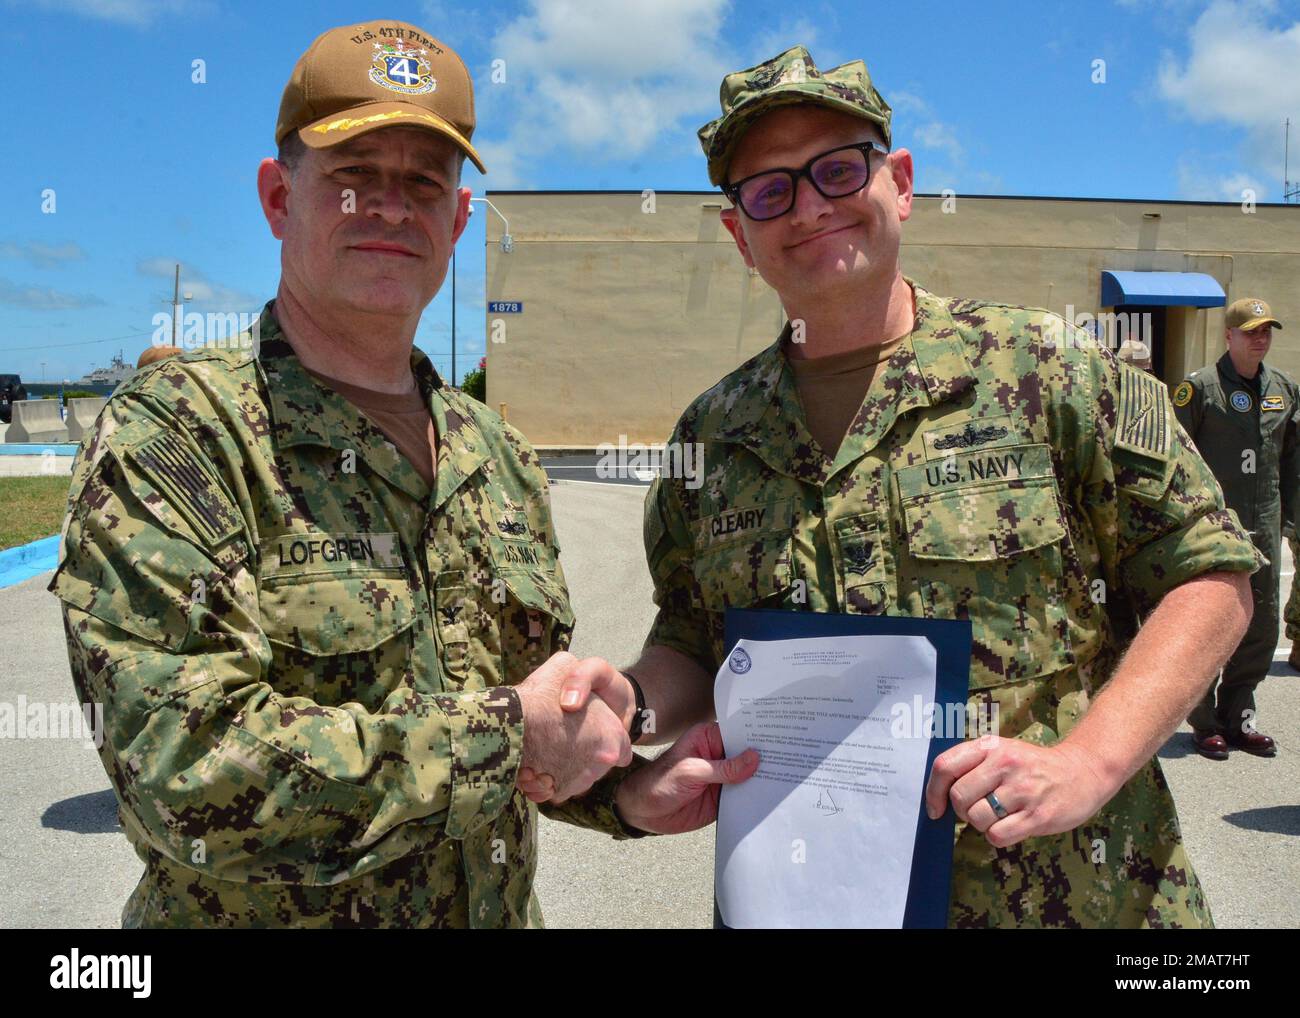 220604-N-RL456-0006  MAYPORT, Fla. (June 4, 2022) Mass Communication Specialist Daniel Cleary, a native of Indianapolis, Ind. and resident of Jacksonville, Fla., is presented a frocking letter prior to being advanced to first class petty officer by Capt. Richard S. Lofgren, commanding officer, U.S. Naval Forces Southern Command/U.S. 4th Fleet reserve component, June 4, 2022. “Making first class is such a big honor to me because it means the Navy sees what I have done during my service and thinks I’m ready for more,” said Cleary. U.S. Naval Forces Southern Command/U.S. 4th Fleet supports U.S. S Stock Photo